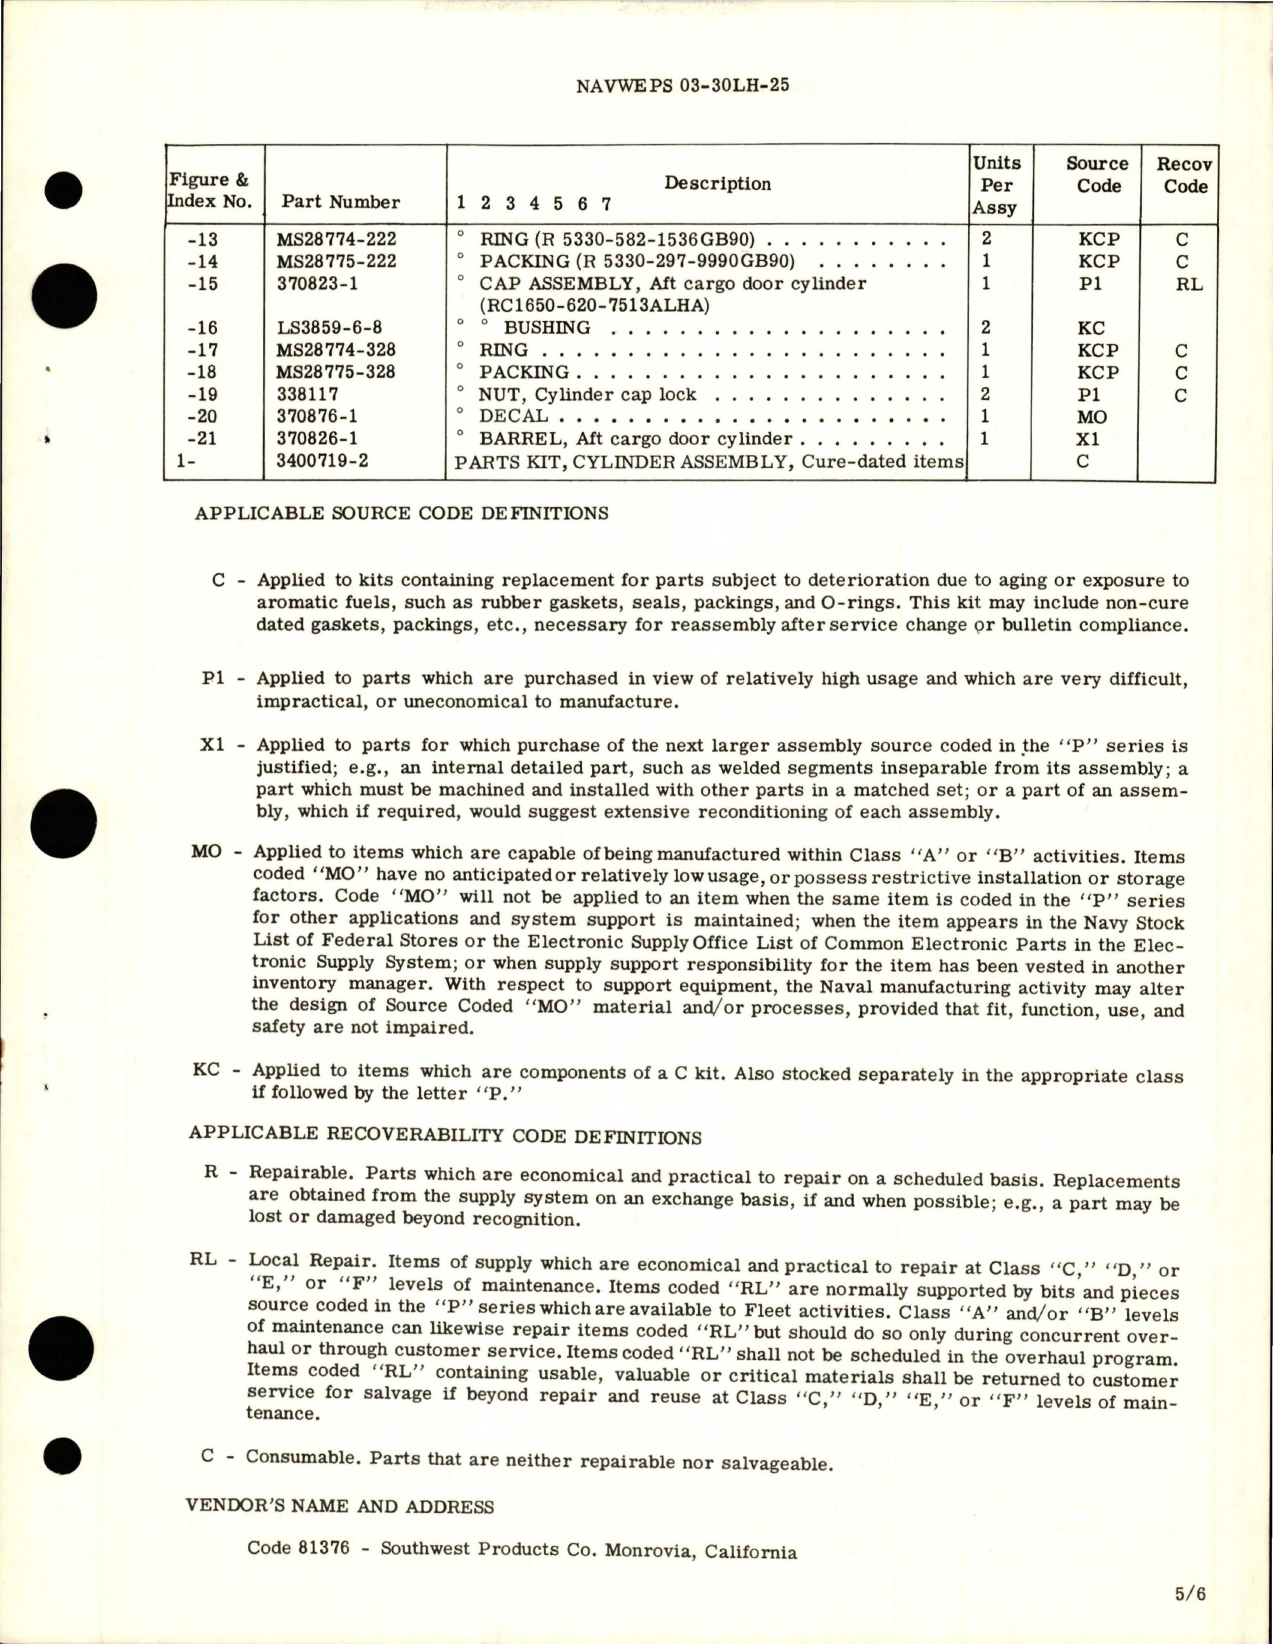 Sample page 5 from AirCorps Library document: Overhaul Instructions with Illustrated Parts Breakdown for AFT Cargo Door Cylinder Assembly - Part 370749-1